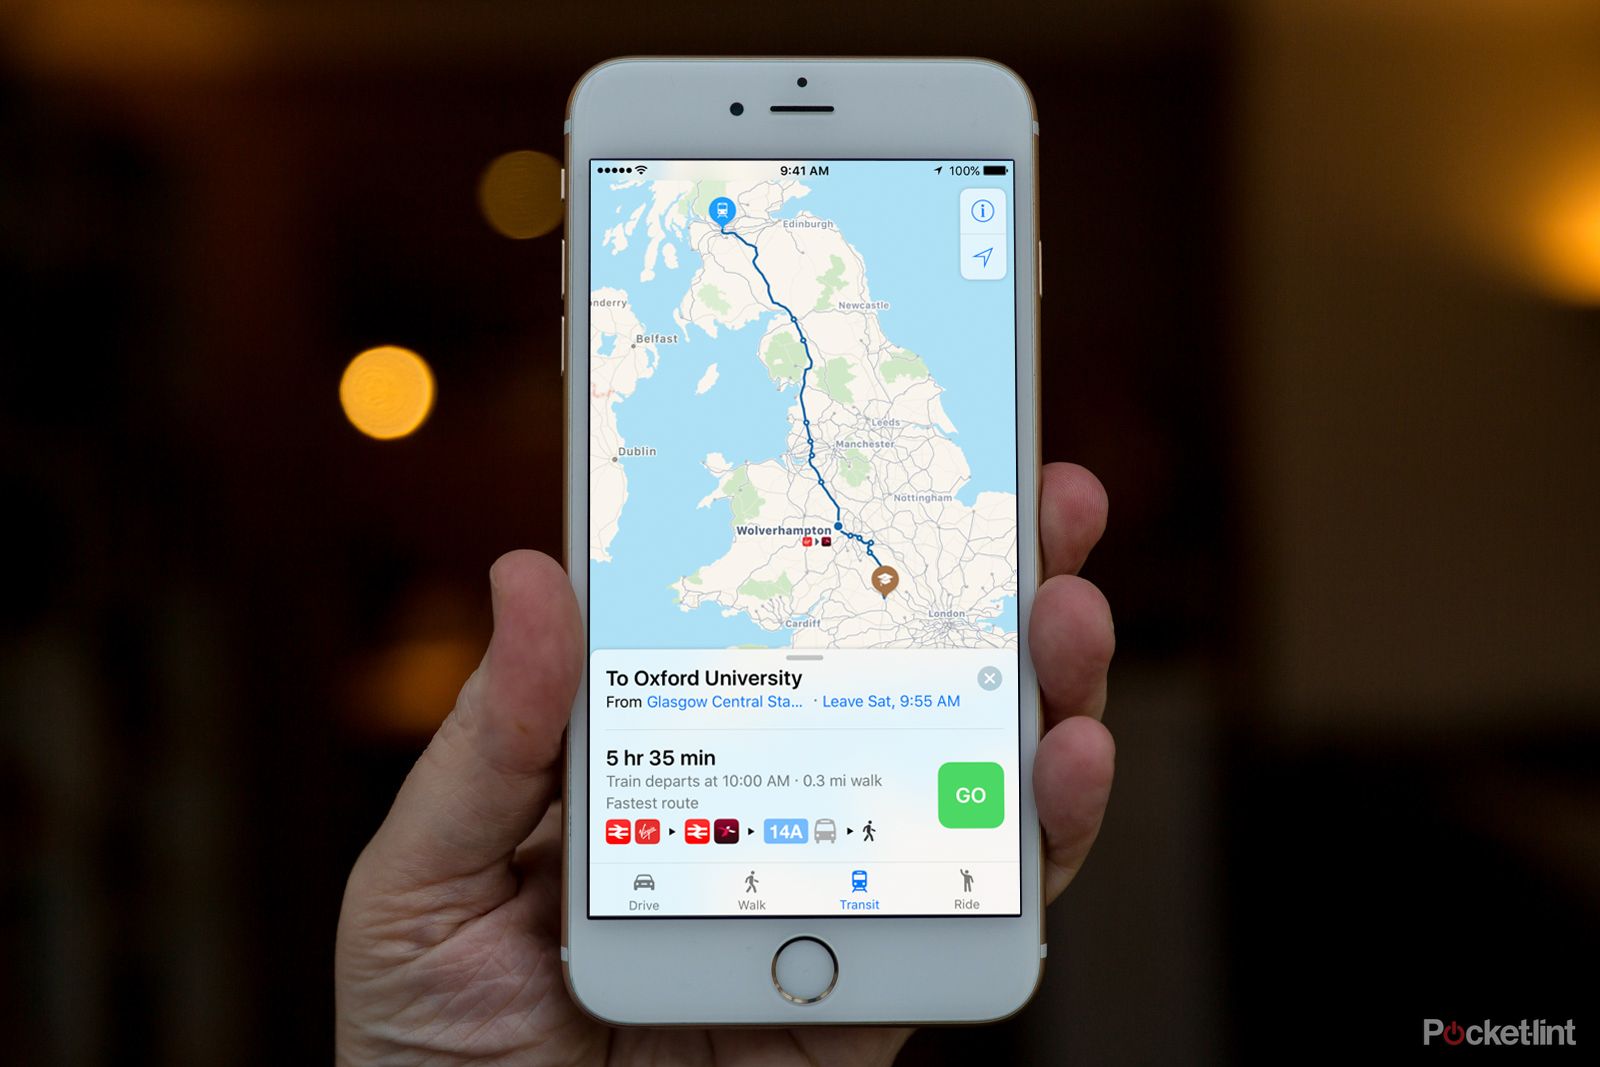 apple maps ios 10 update adds live public transport information for the whole of britain image 1